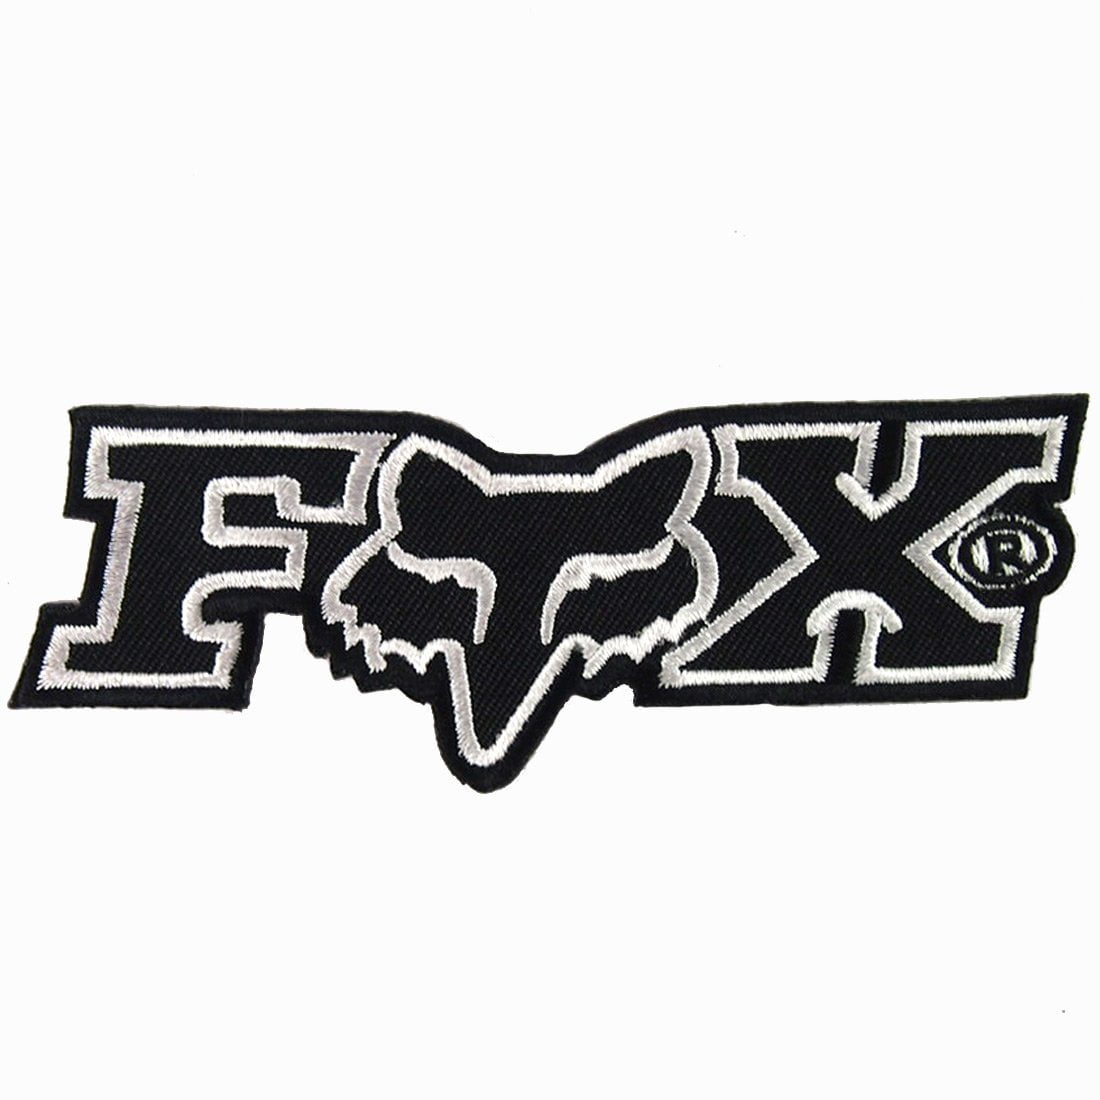 FOX Blue or black color Embroidered logo iron on swe on Patch 